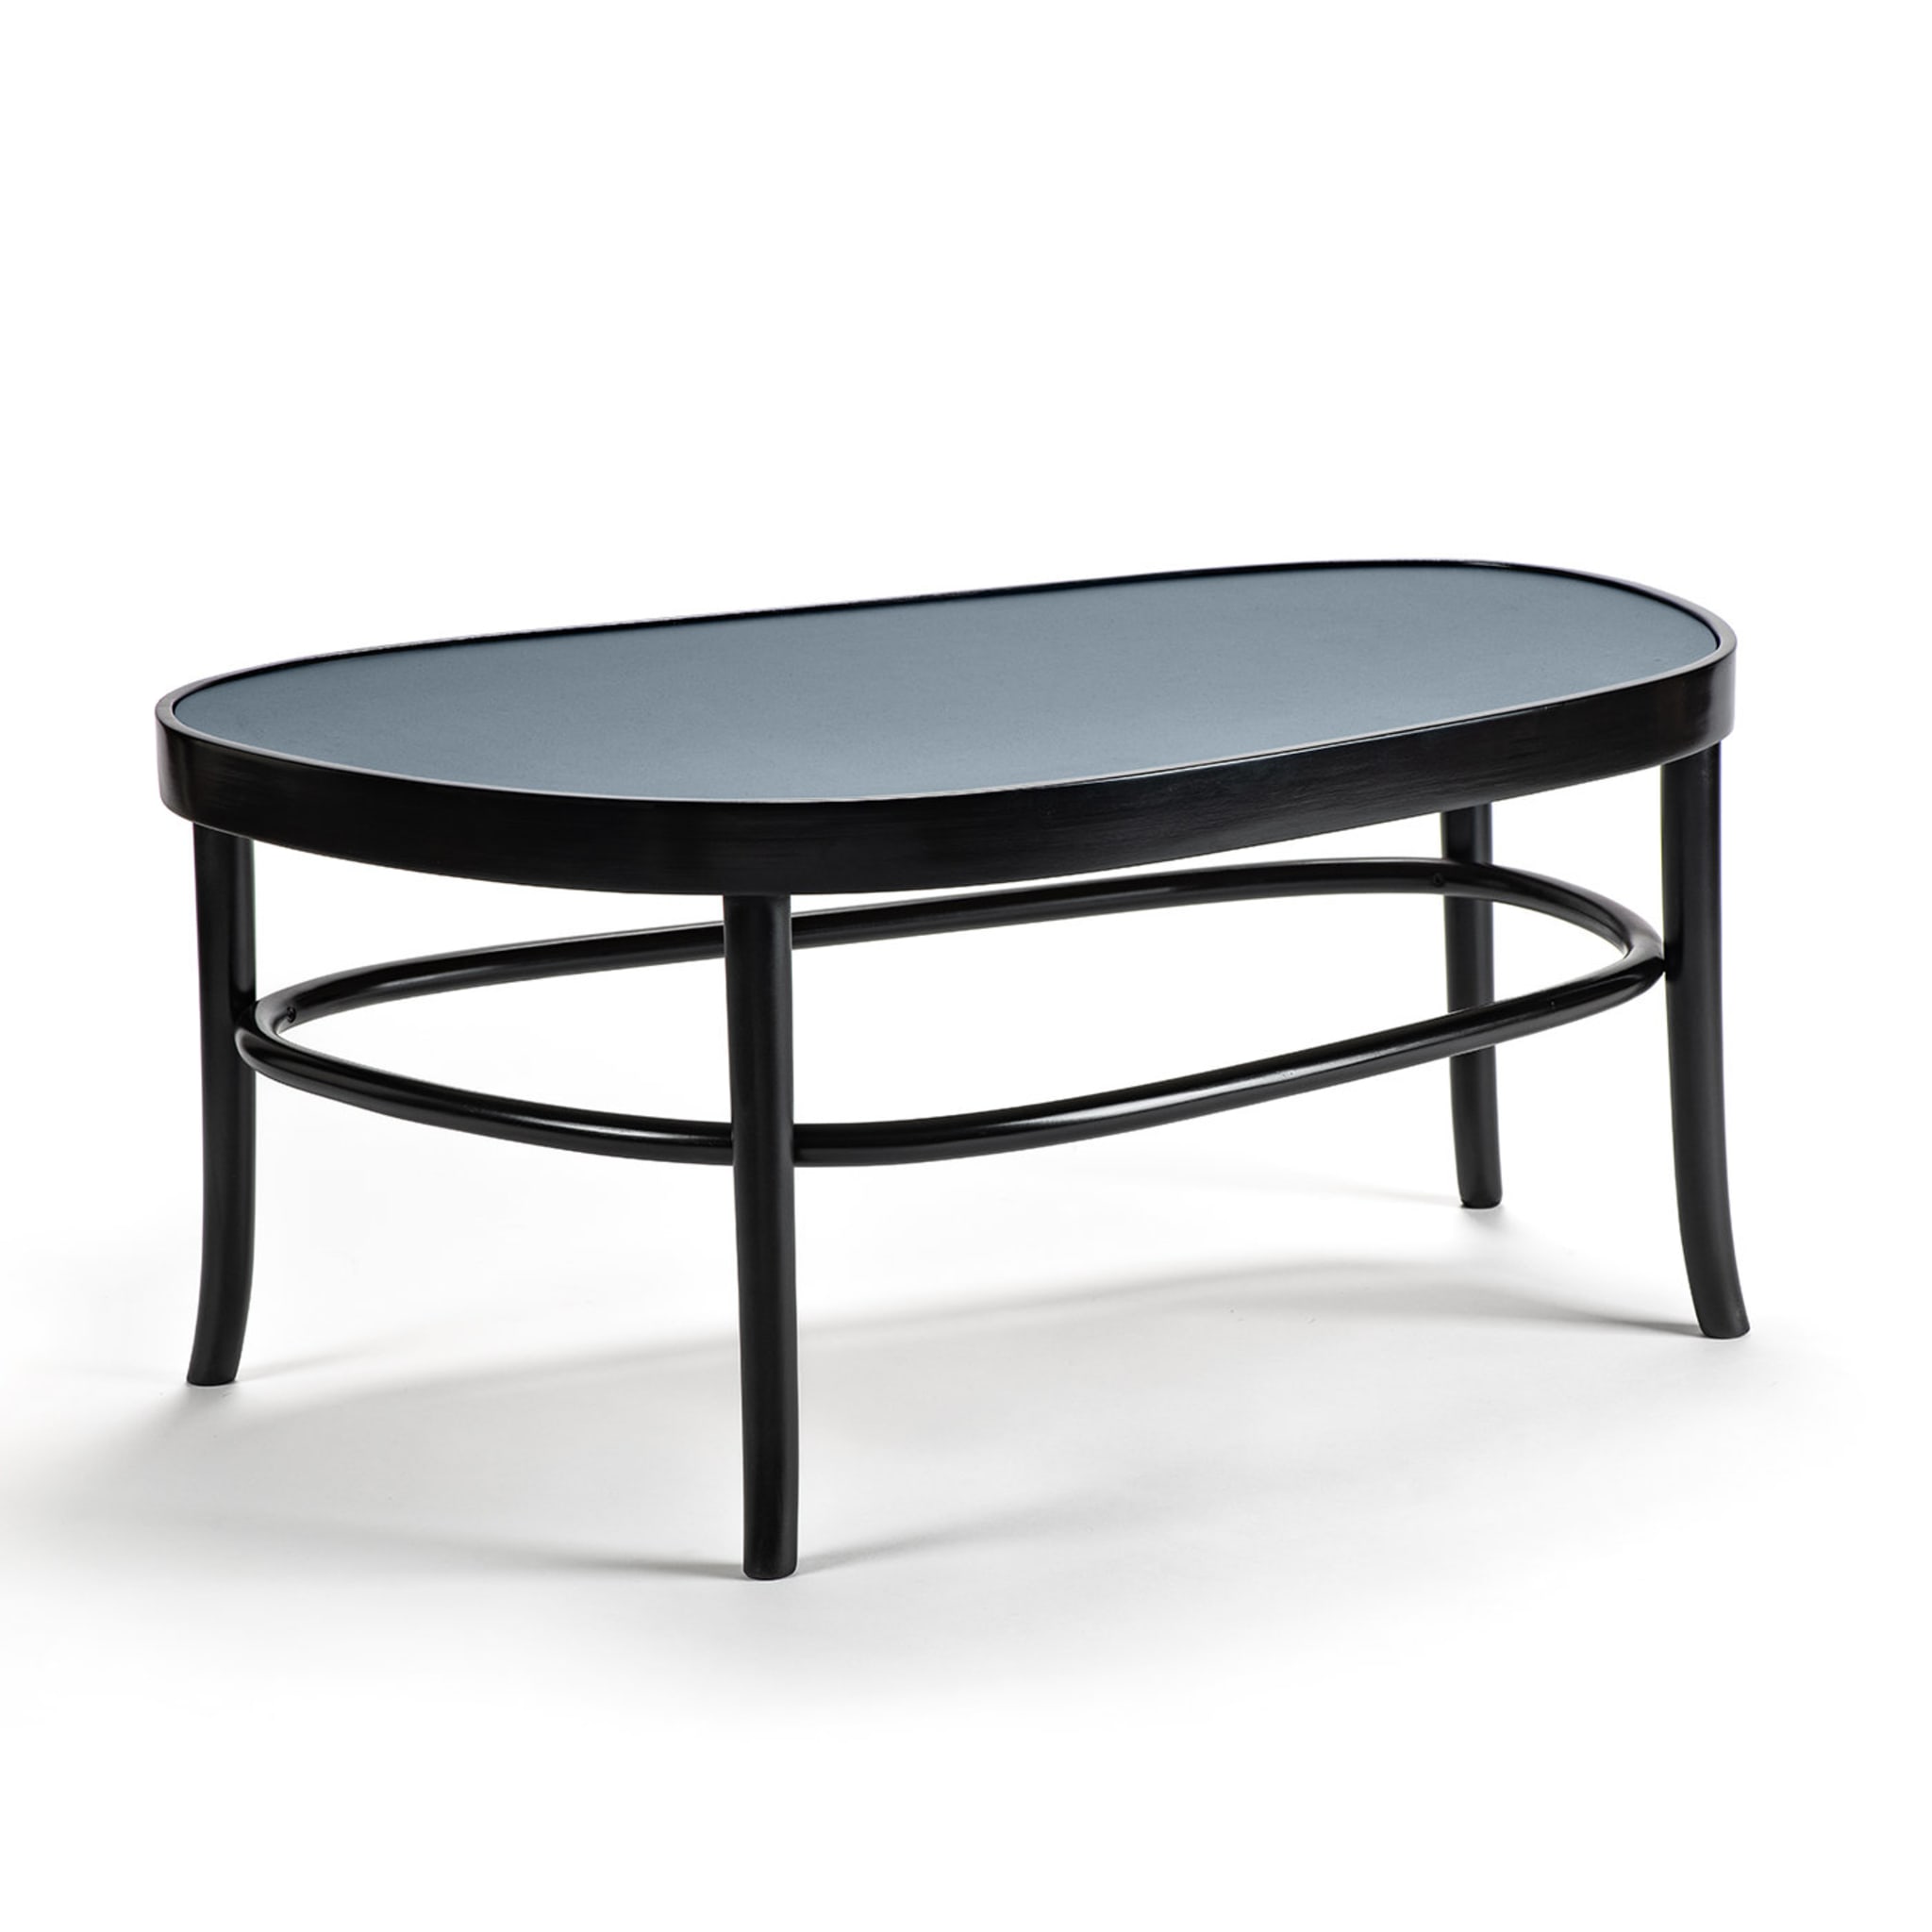 Large Peers Coffee Table by Front - Alternative view 1